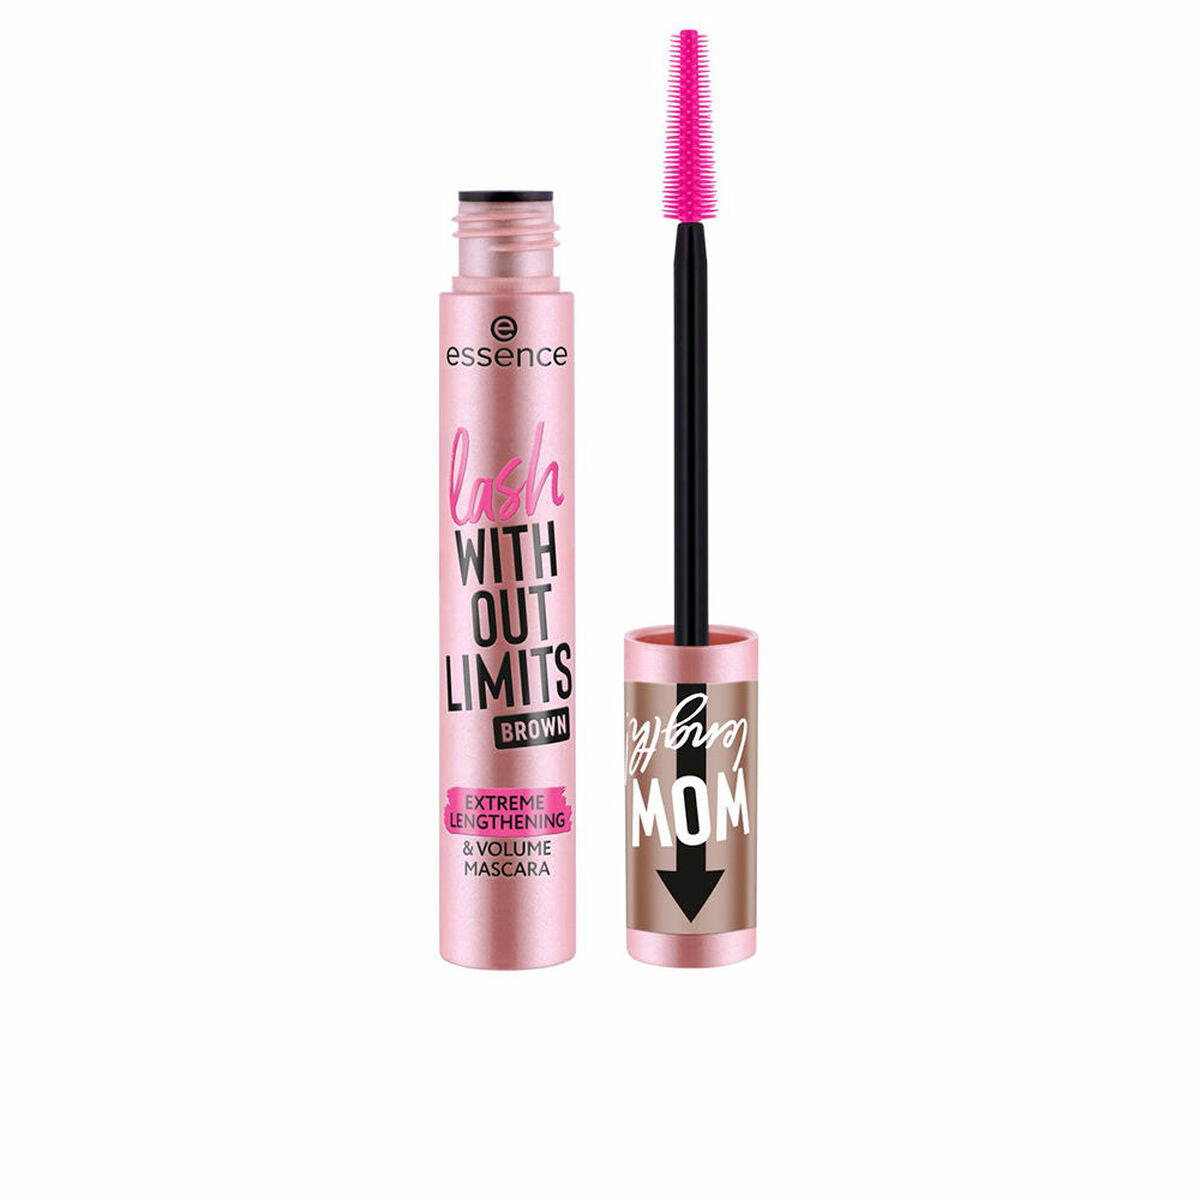 Mascara Essence LASH WITH OUT LIMITS Nº 02 brown 13 ml